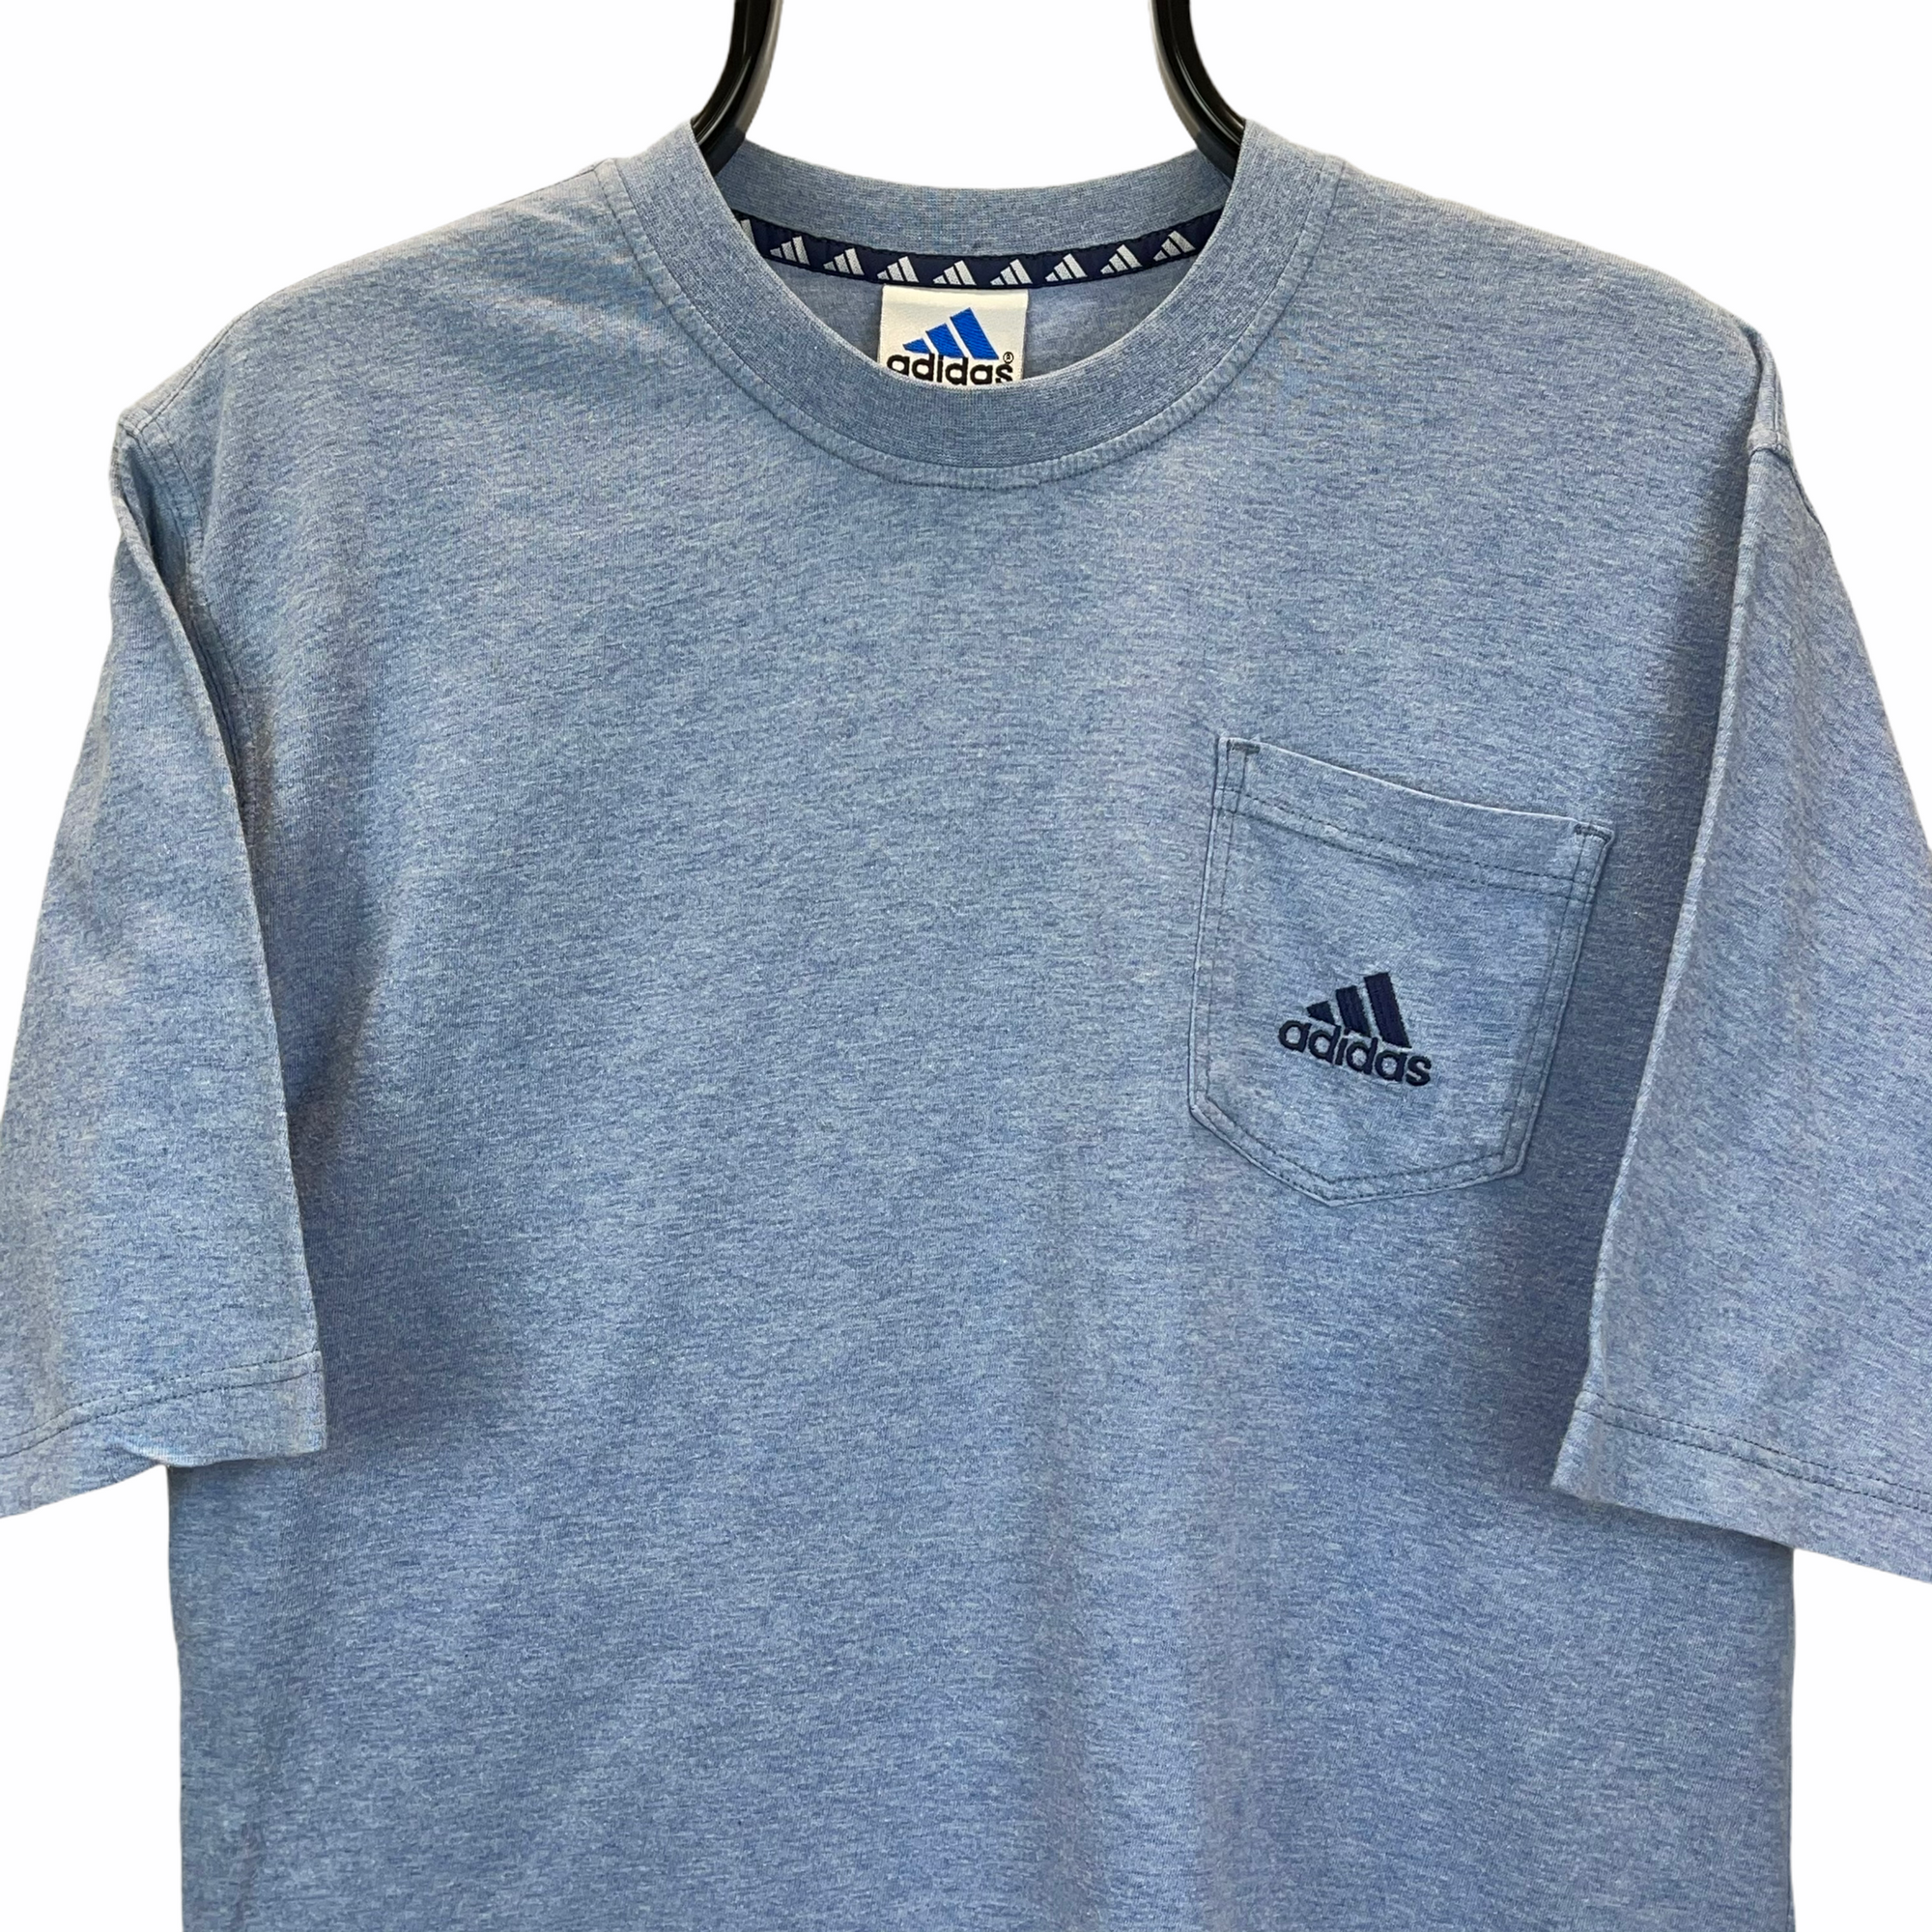 VINTAGE 90S ADIDAS EMBROIDERED SMALL LOGO TEE IN BLUE MARL - MEN'S LARGE/WOMEN'S XL